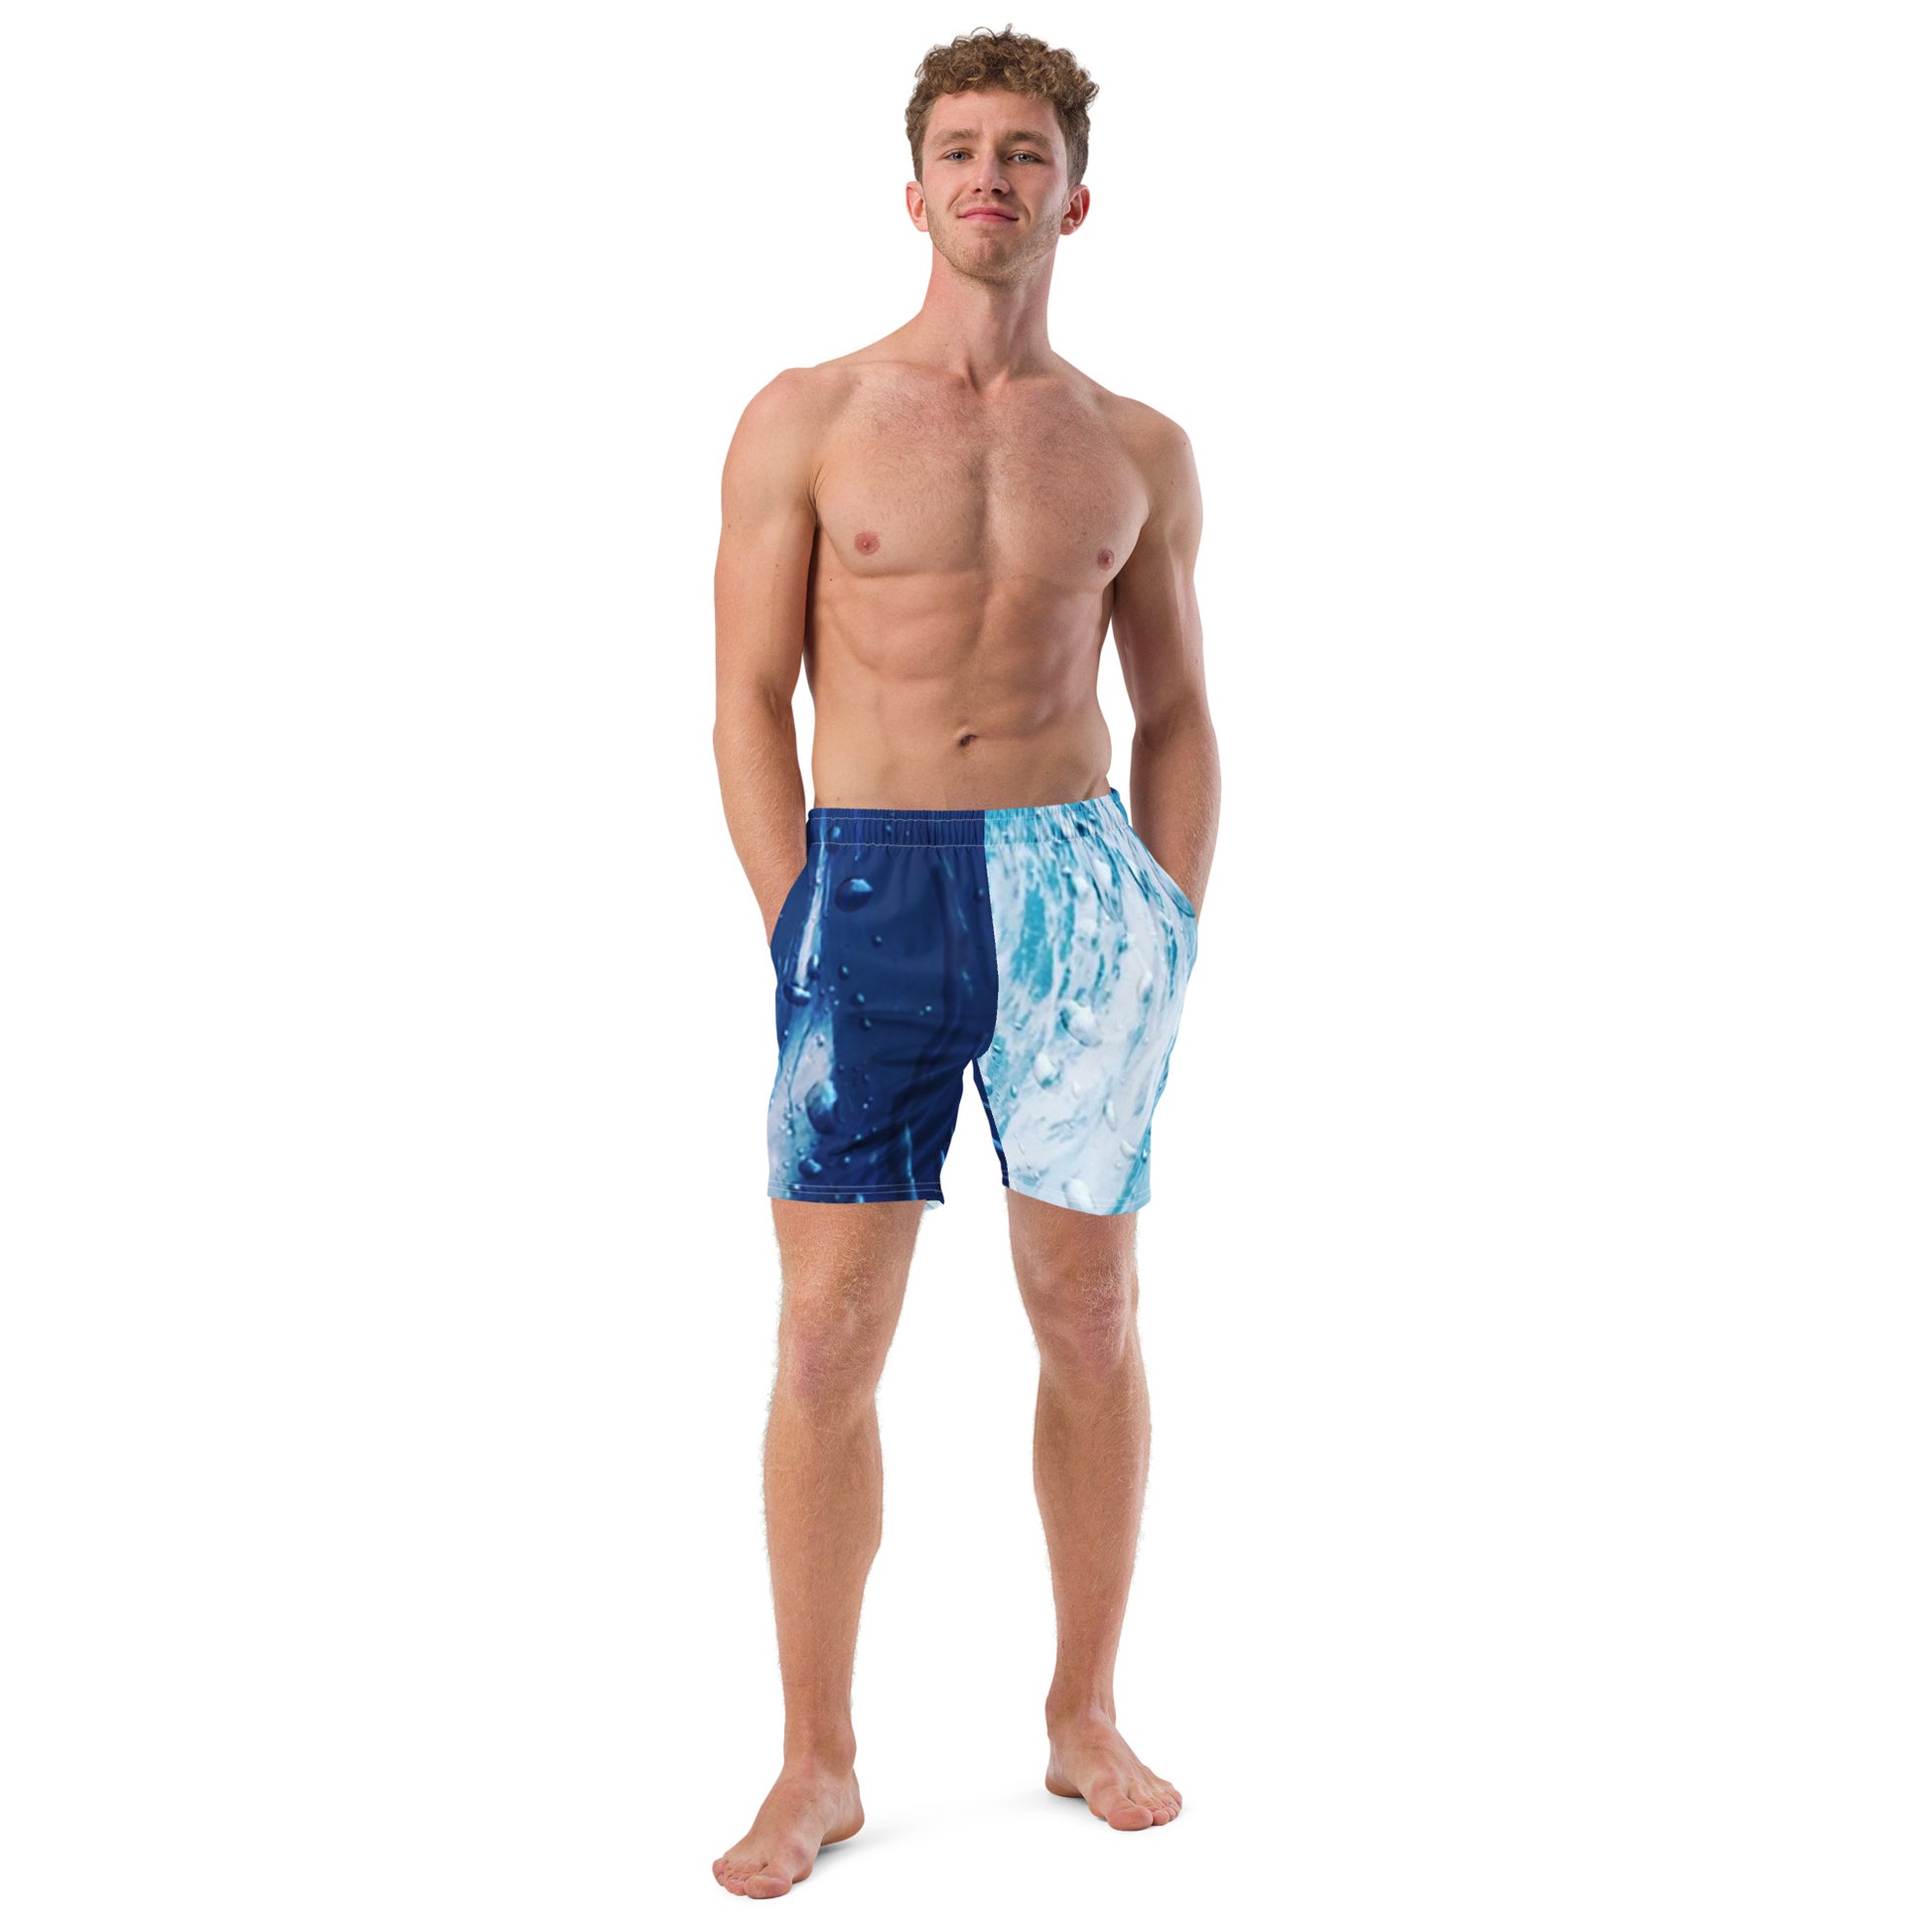 Dedicated artists wearing vibrant Ride the Wave Swim Trunks, embodying the artistic journey's highs and lows with the passion that drives their creativity. Embrace the ups and downs with SpotlYght Seeker's inspirational blend of style and support at the beach.